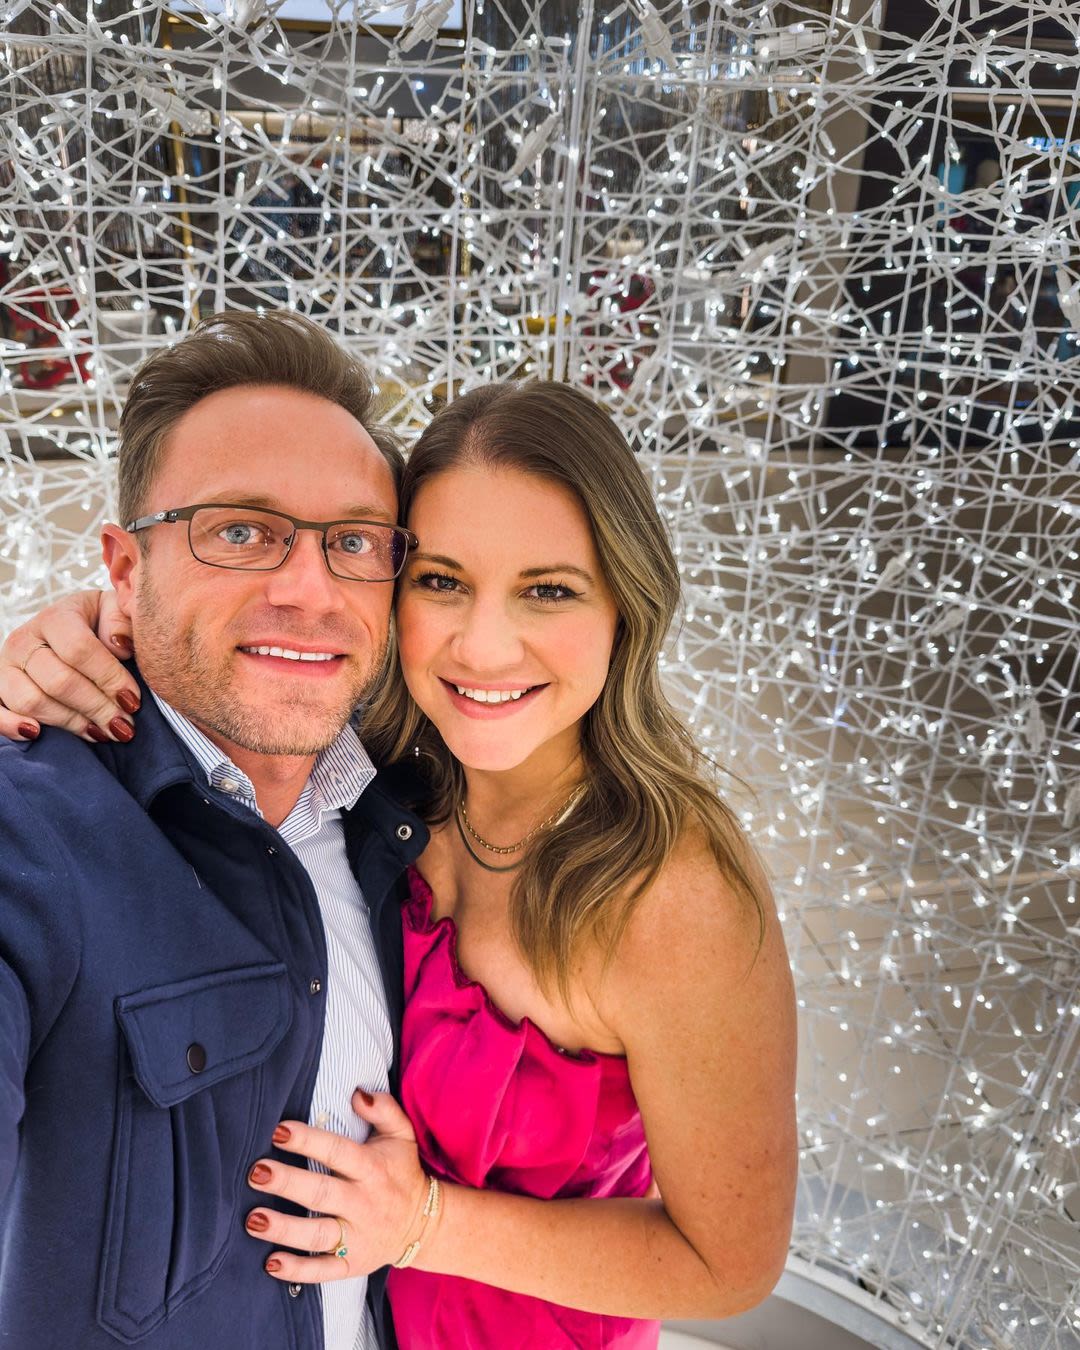 OutDaughtered’s Danielle Busby Tries to Convince Husband Adam to Hire Help for Their Kids